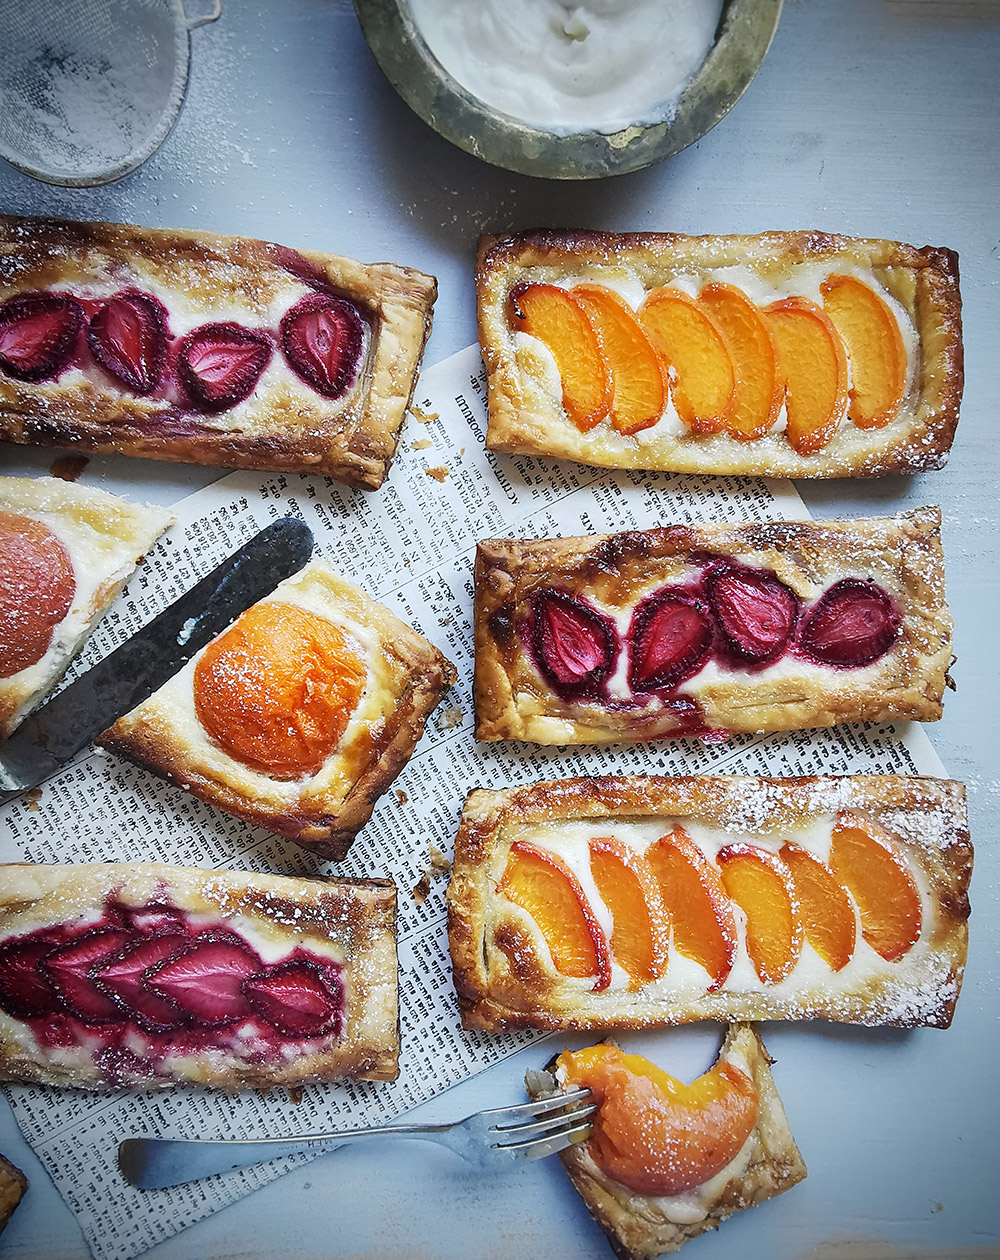 Apricot and strawberry danishes